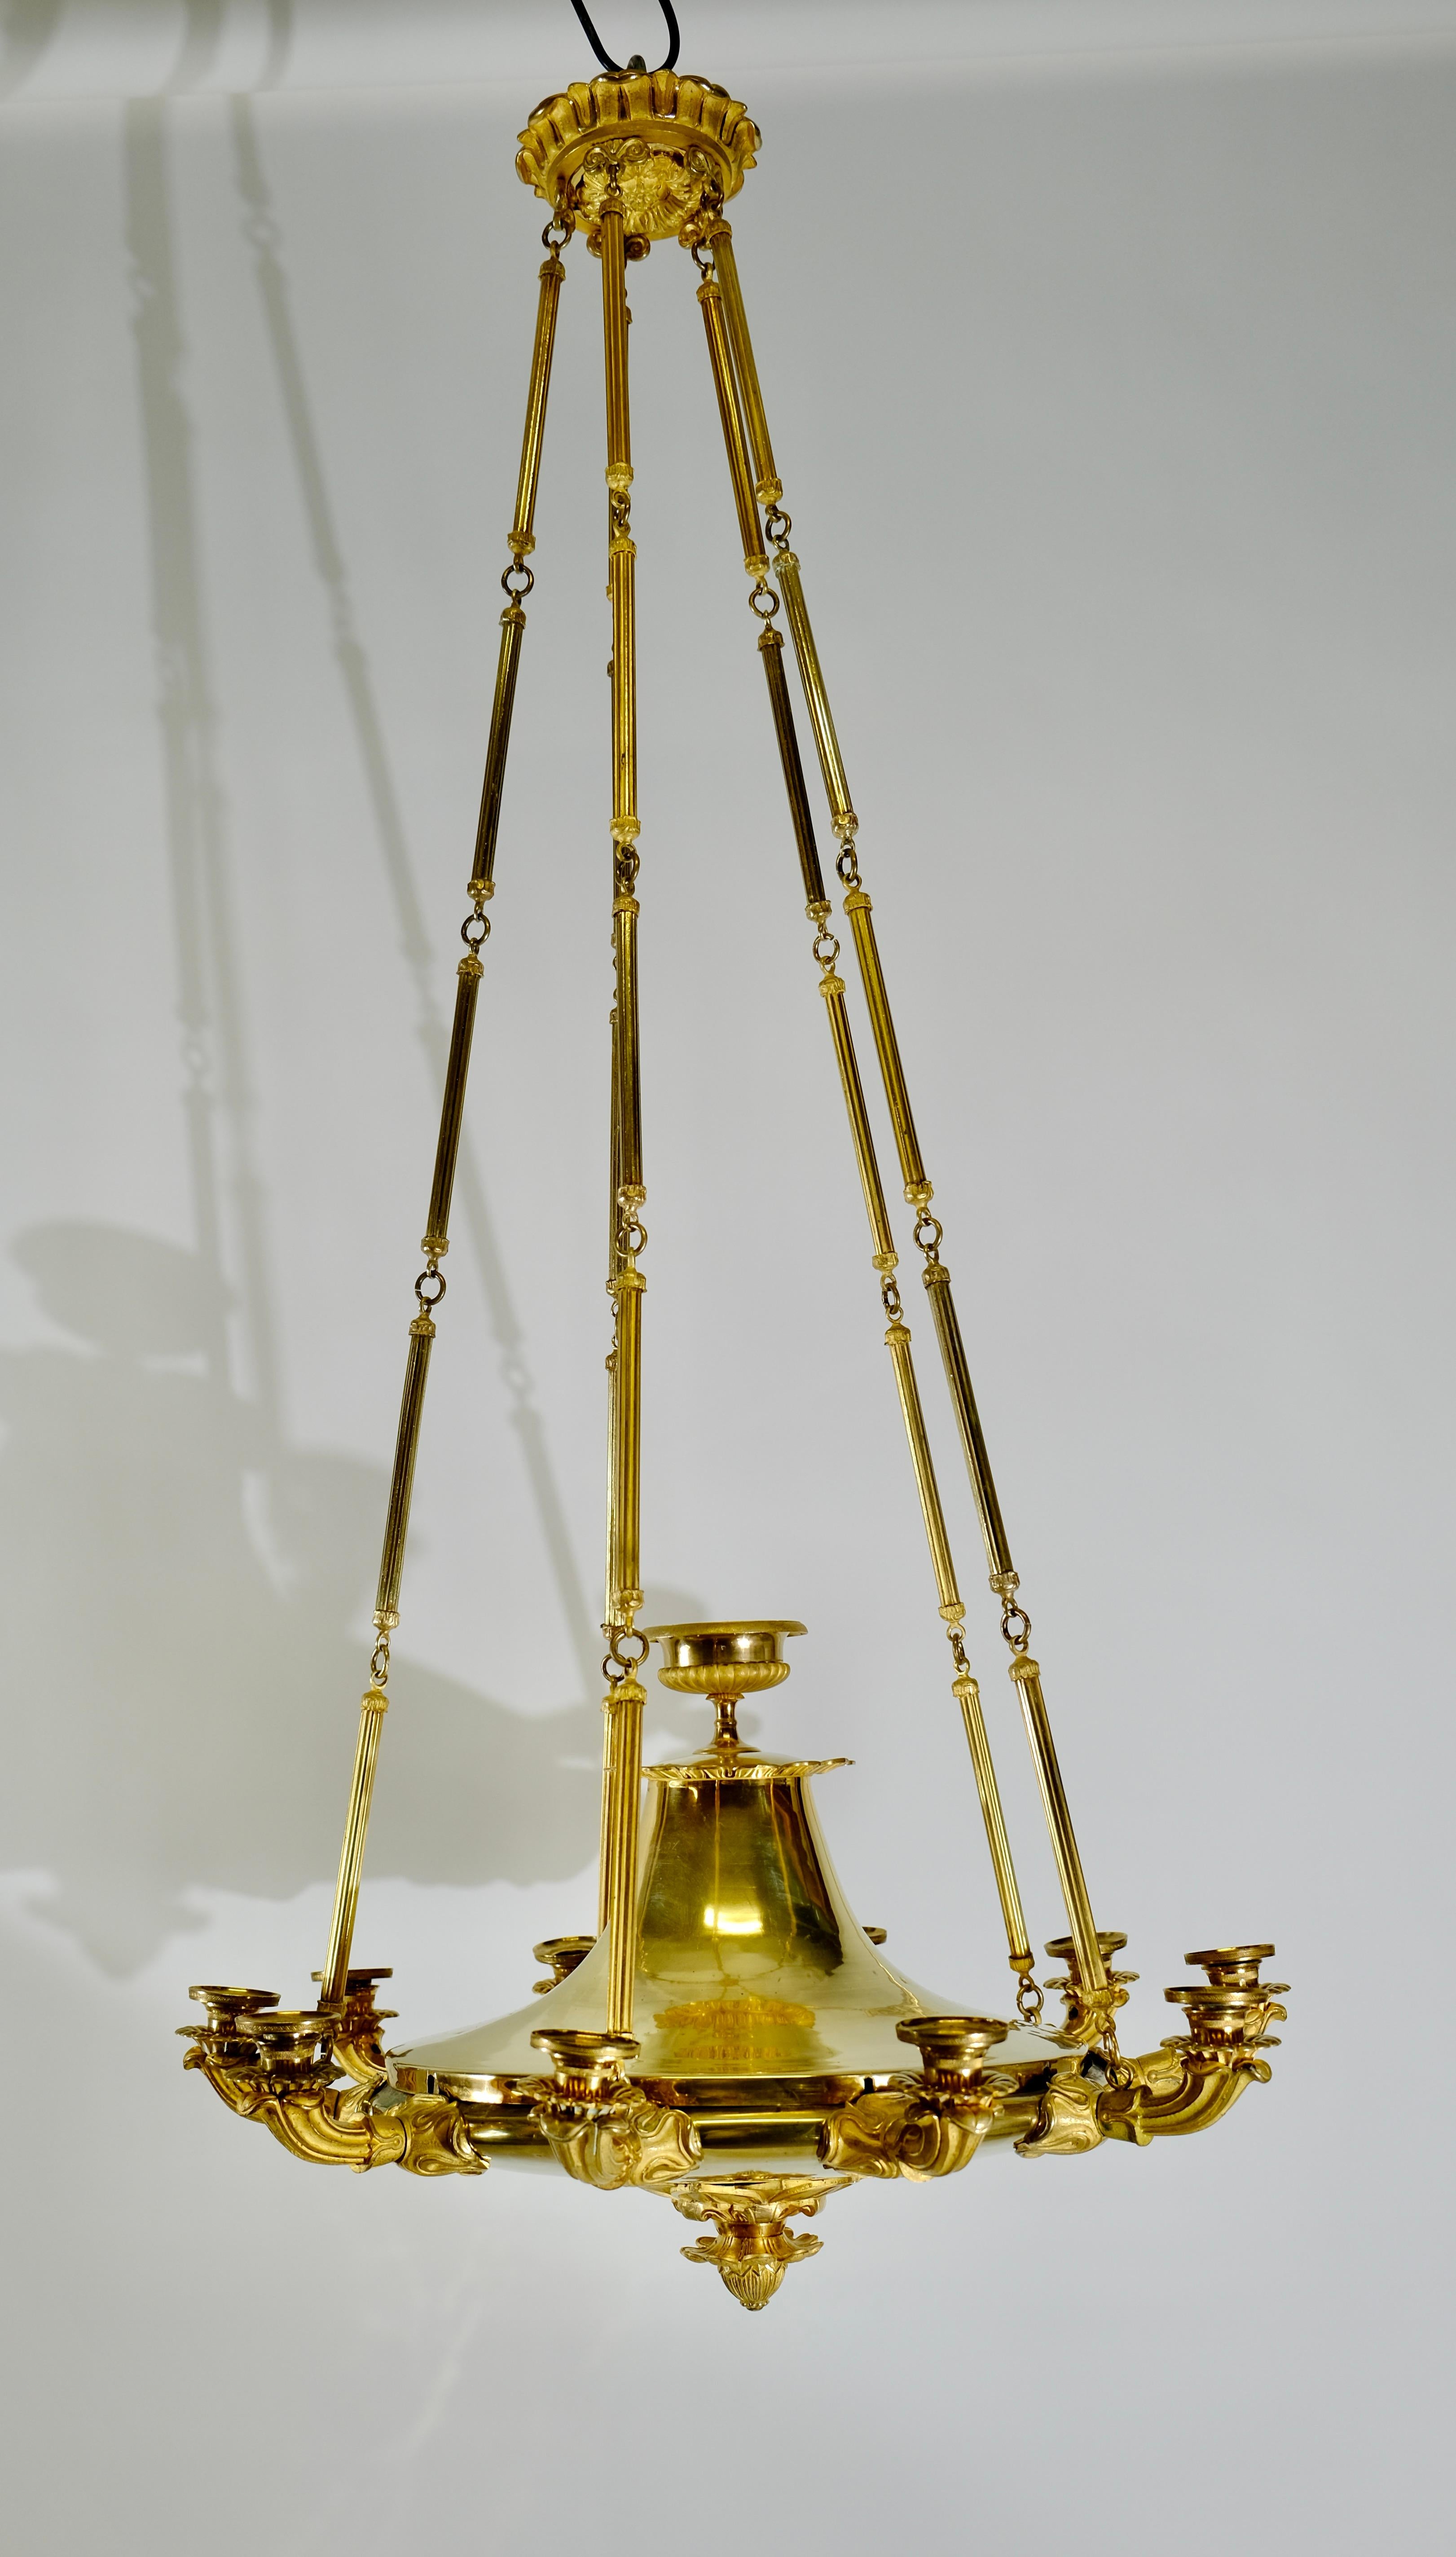 Large Empire Chandelier with Ten Candleholders in great condition. Ca 1820. For Sale 7